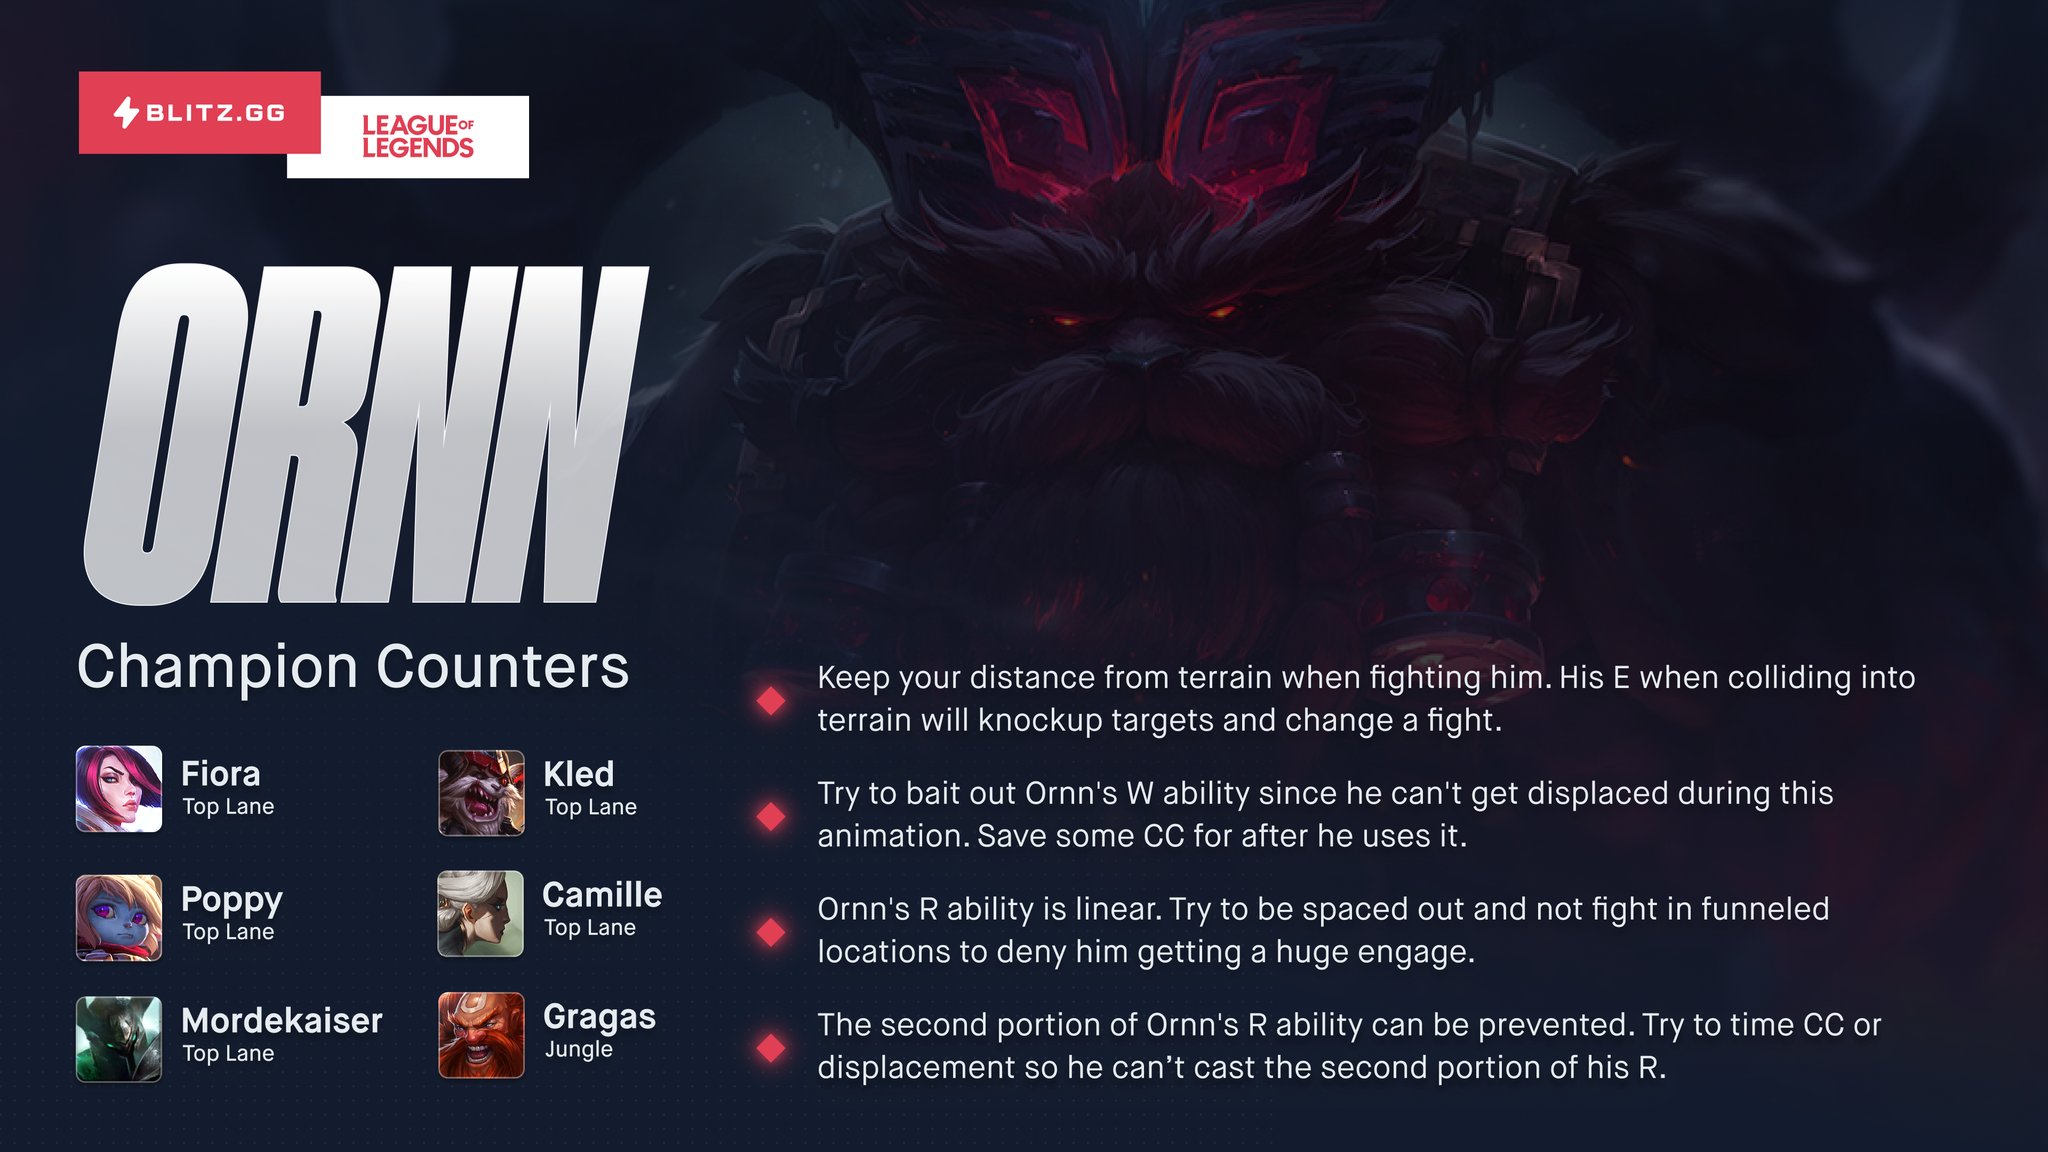 en kreditor fred Tochi træ Blitz App a Twitter: "if the Ornn is upgrading someone's mythic that is not  yours, you are obviously not carrying hard enough and you need to step it  up https://t.co/kq3A4UOgHN" / Twitter